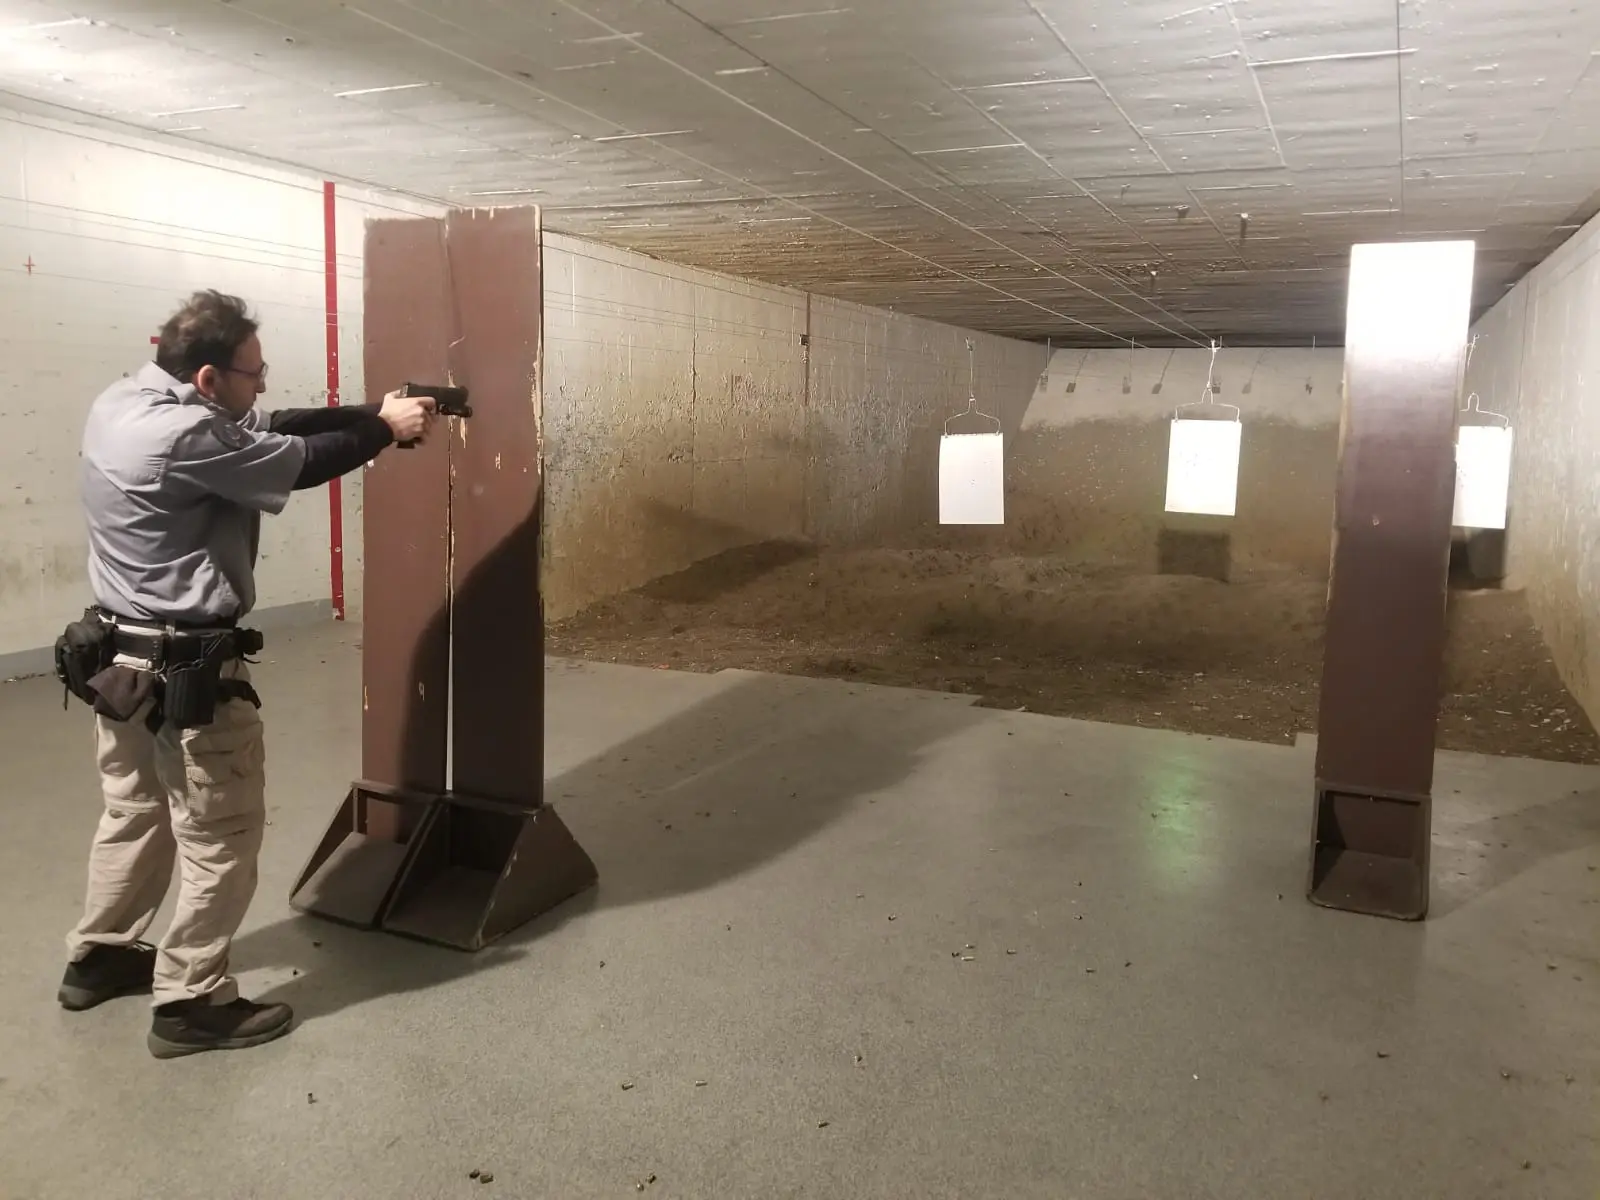 A man is shooting at an indoor target.